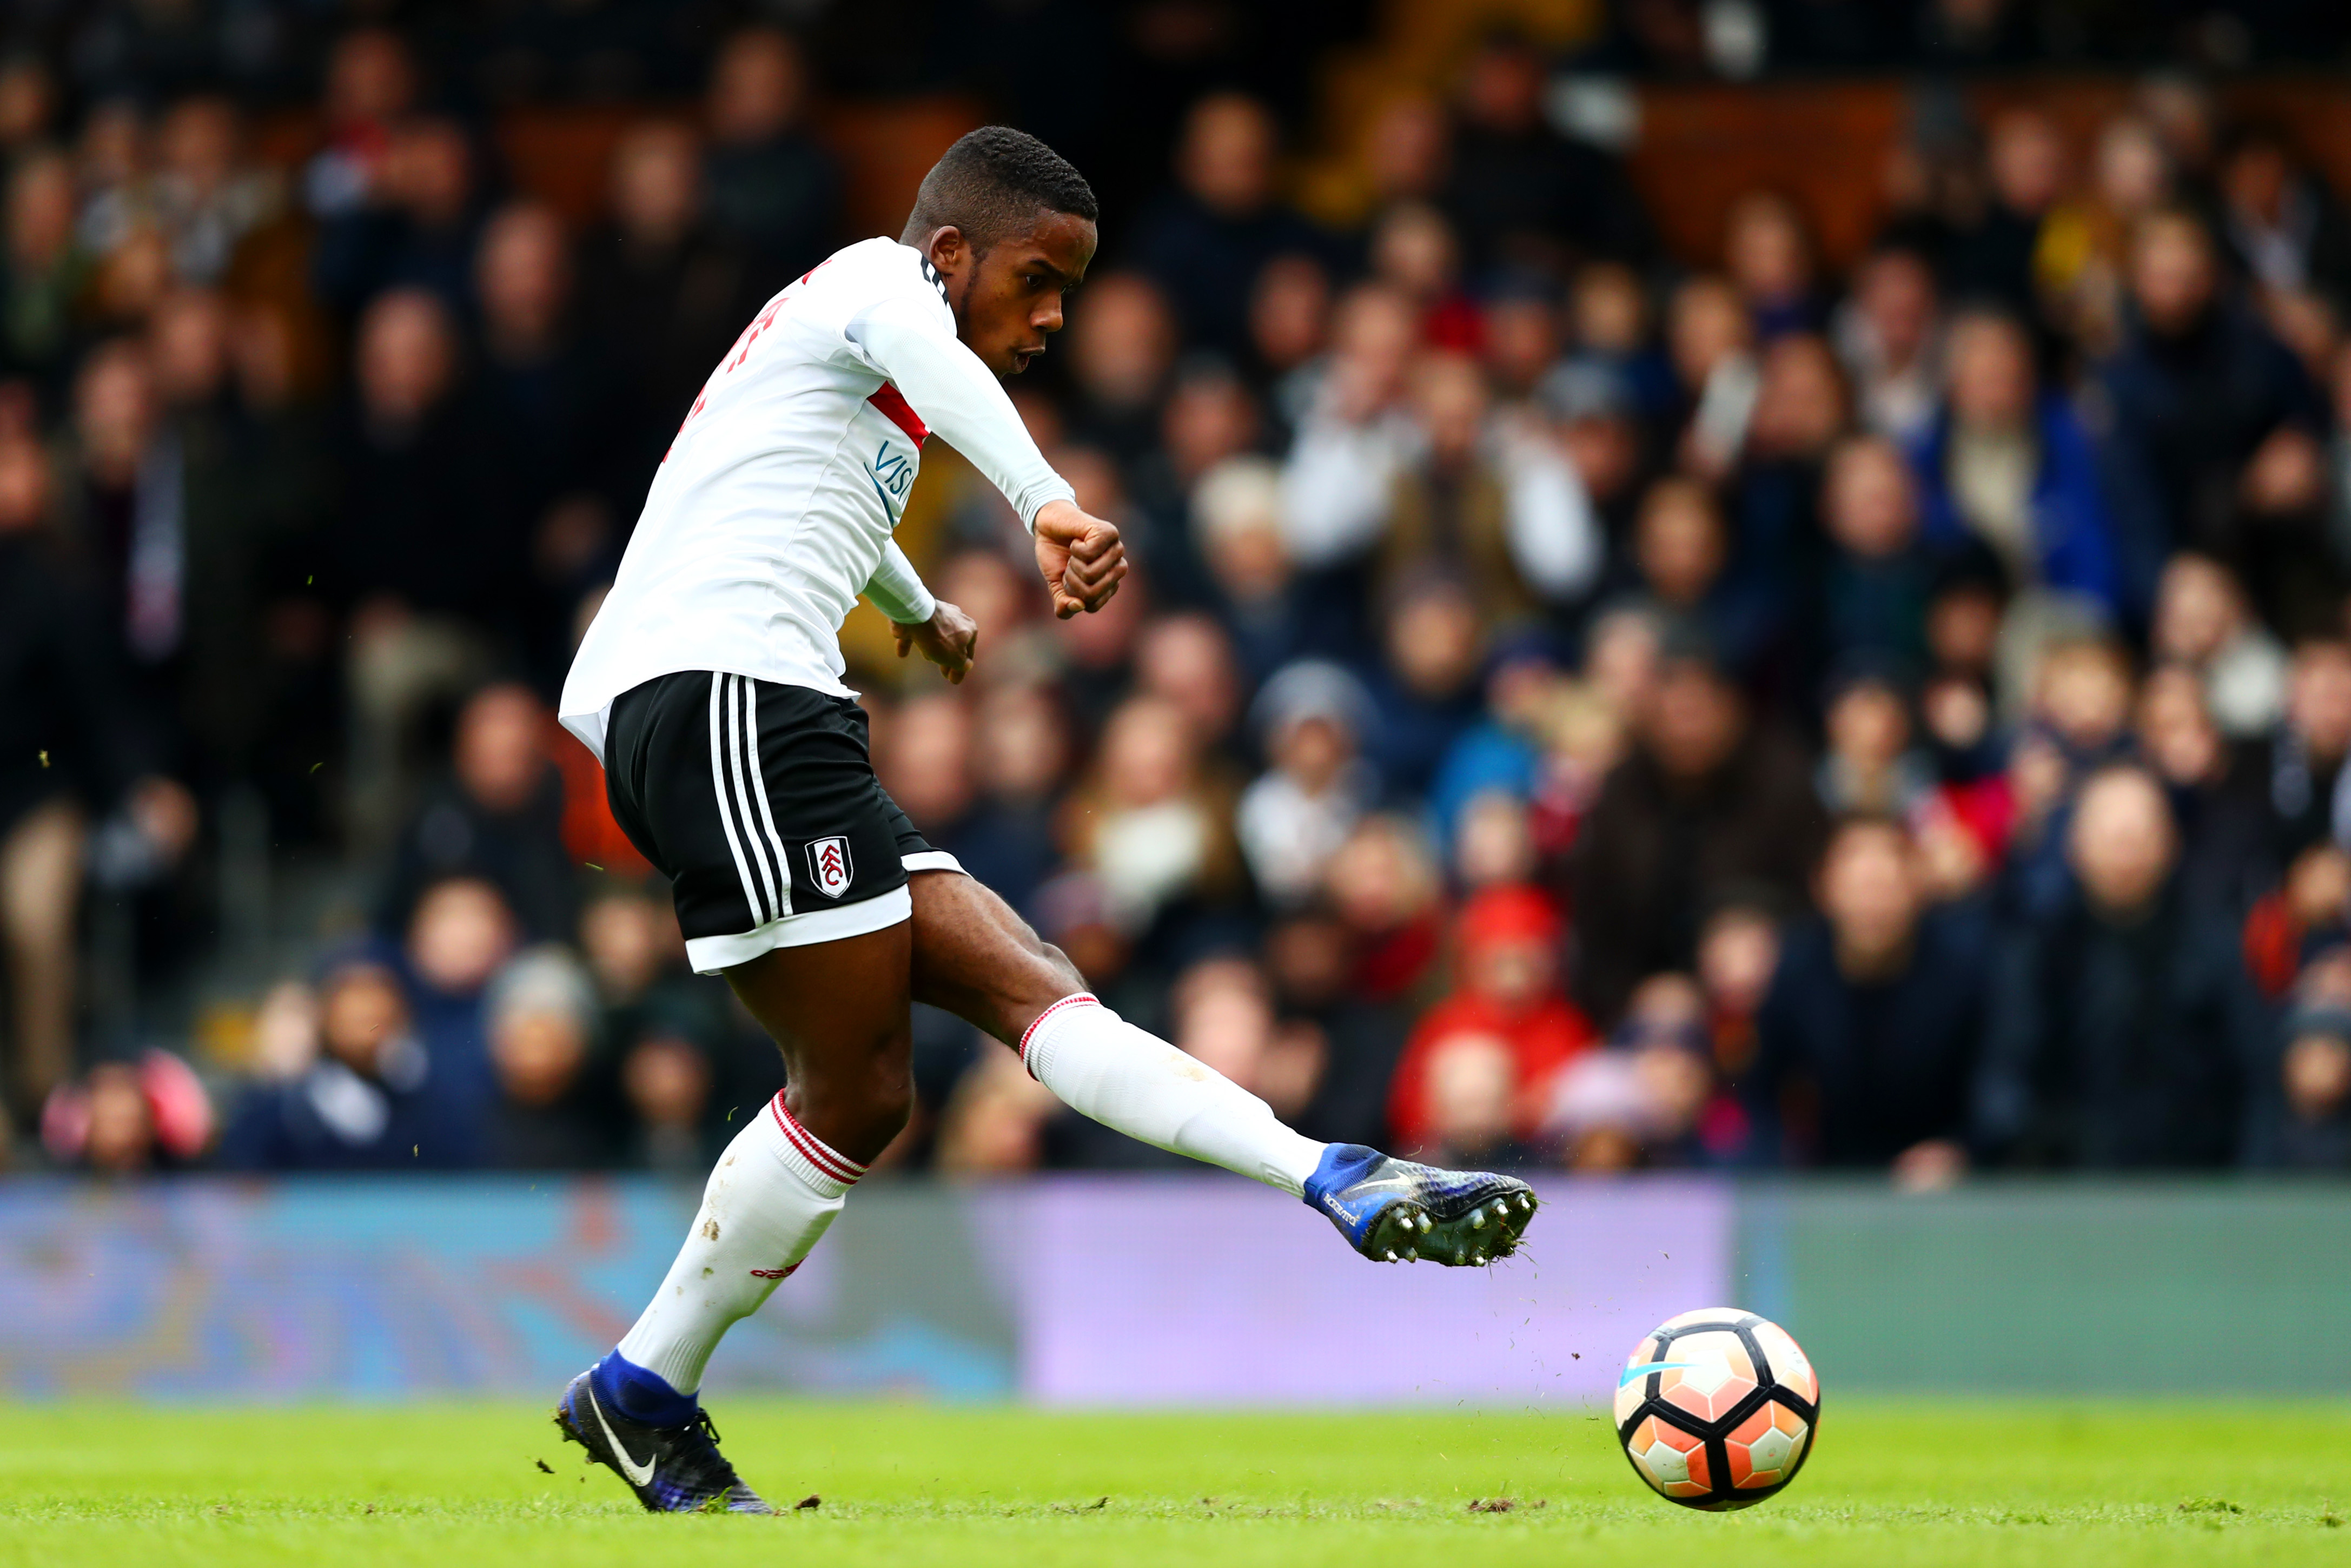 LONDON, ENGLAND - JANUARY 29:  Ryan Sessegnon of Fulham shoots at goal during the Emirates FA Cup Fourth Round match between Fulham and Hull City at Craven Cottage on January 29, 2017 in London, England.  (Photo by Dan Istitene/Getty Images)